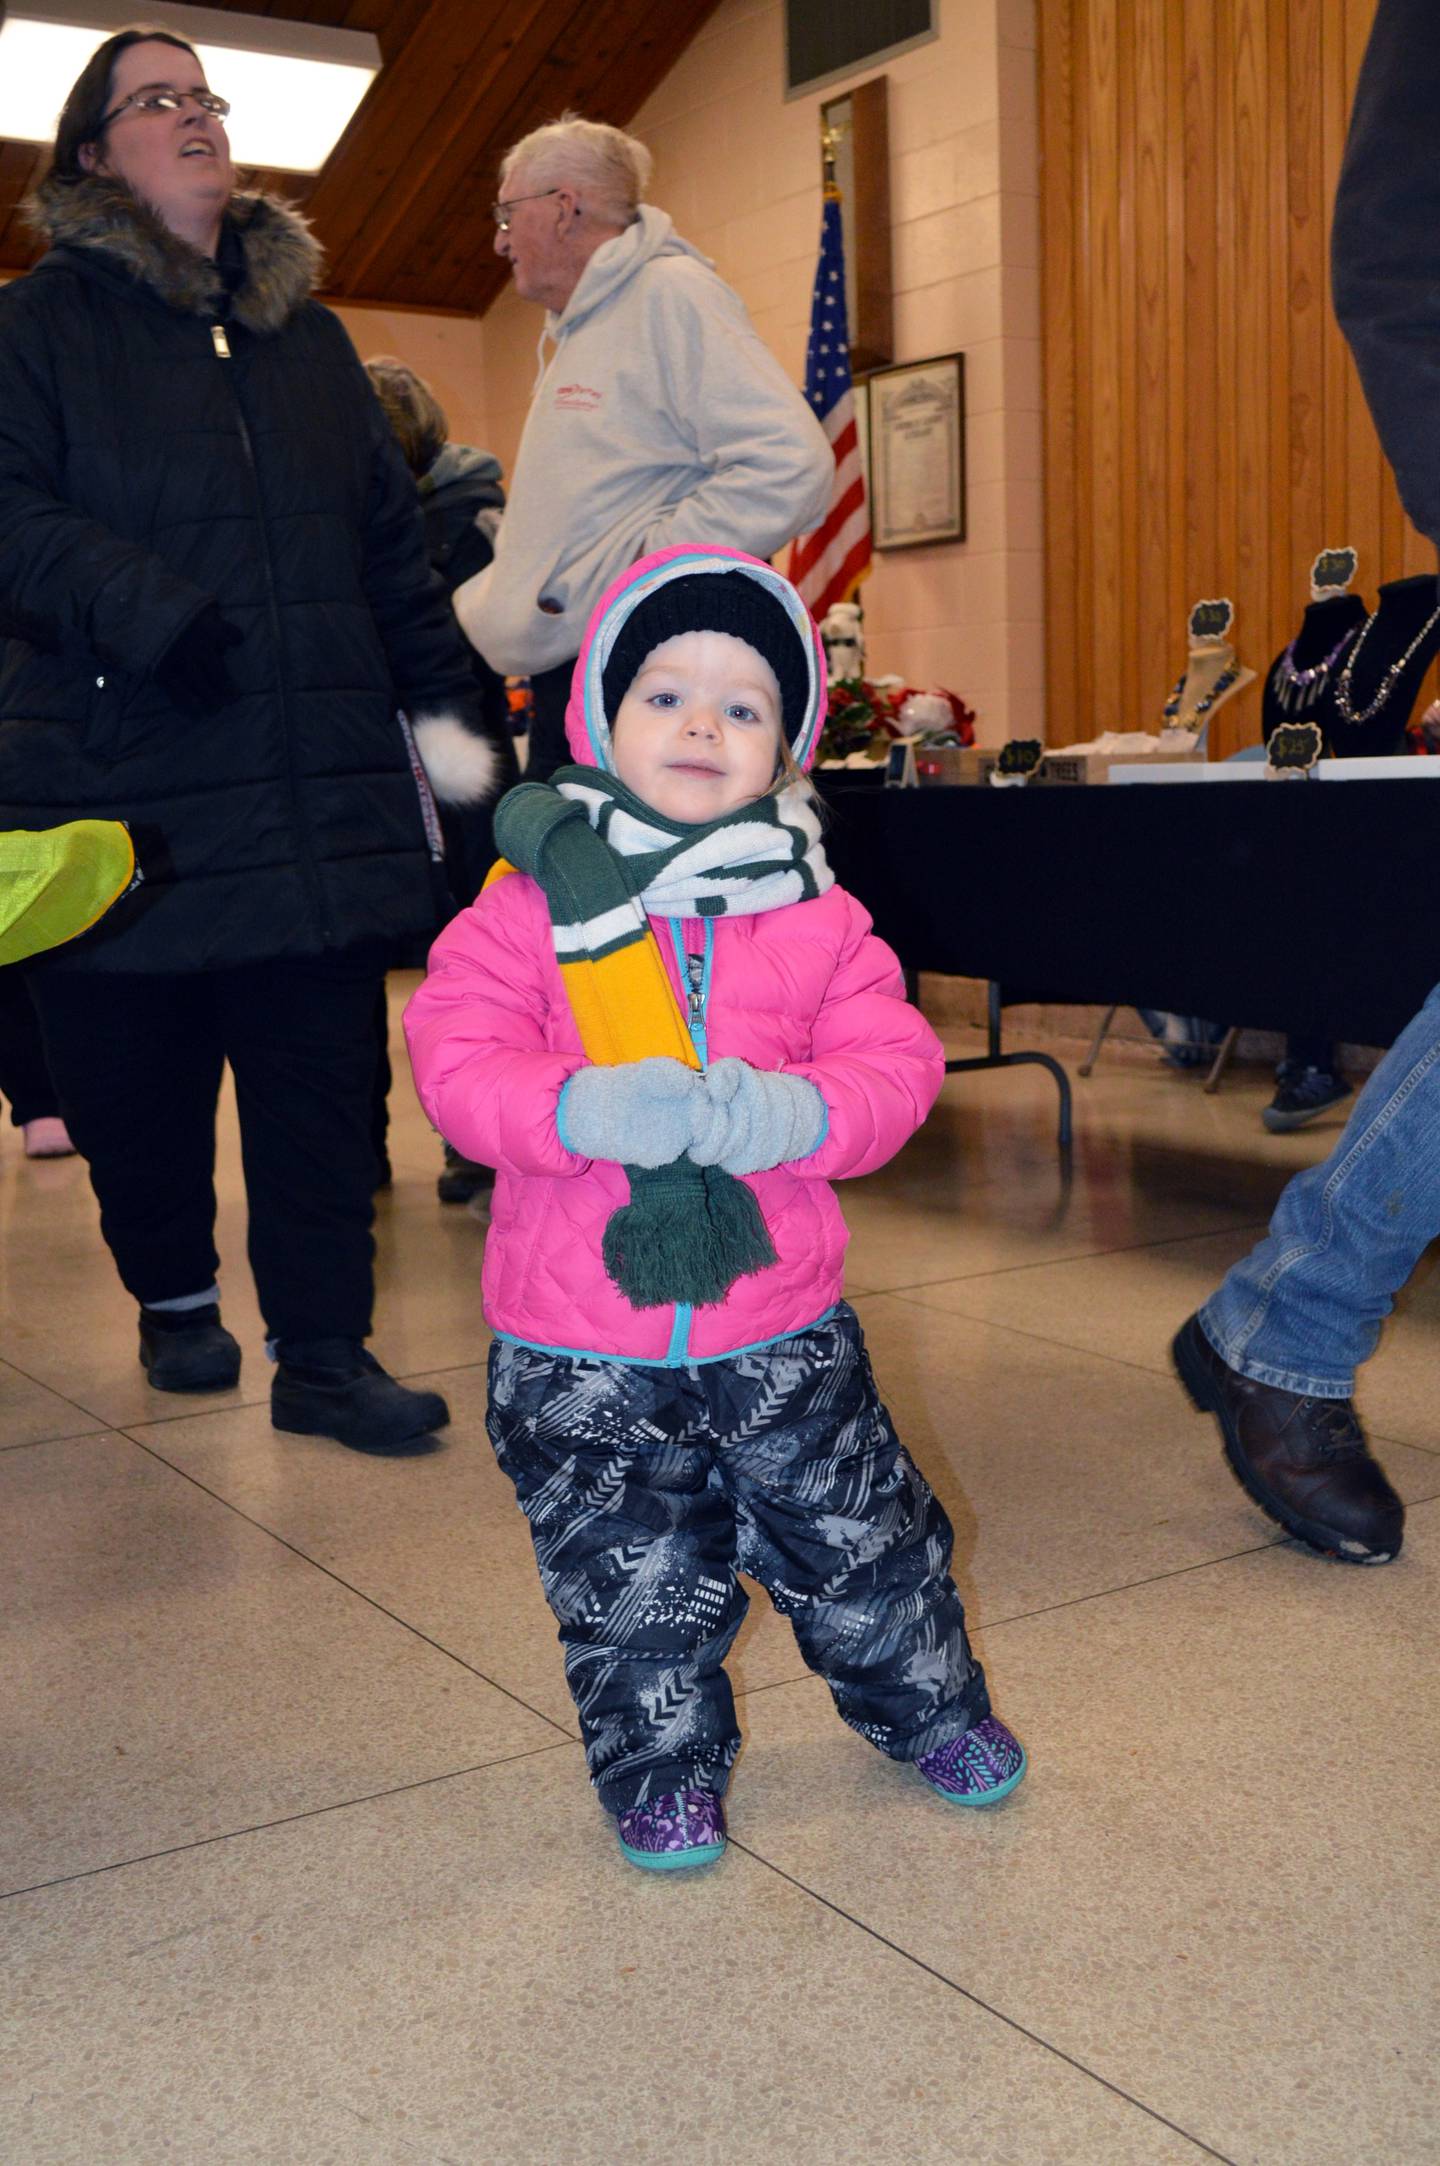 Teagan Rubright, 2, of Davis, is bundled up against the bitter cold, even while inside. Teagan and her family attended Leaf River's Christmas market in the Bertolet Building on Dec. 17. The event was part of Leaf River's Christmas festival.